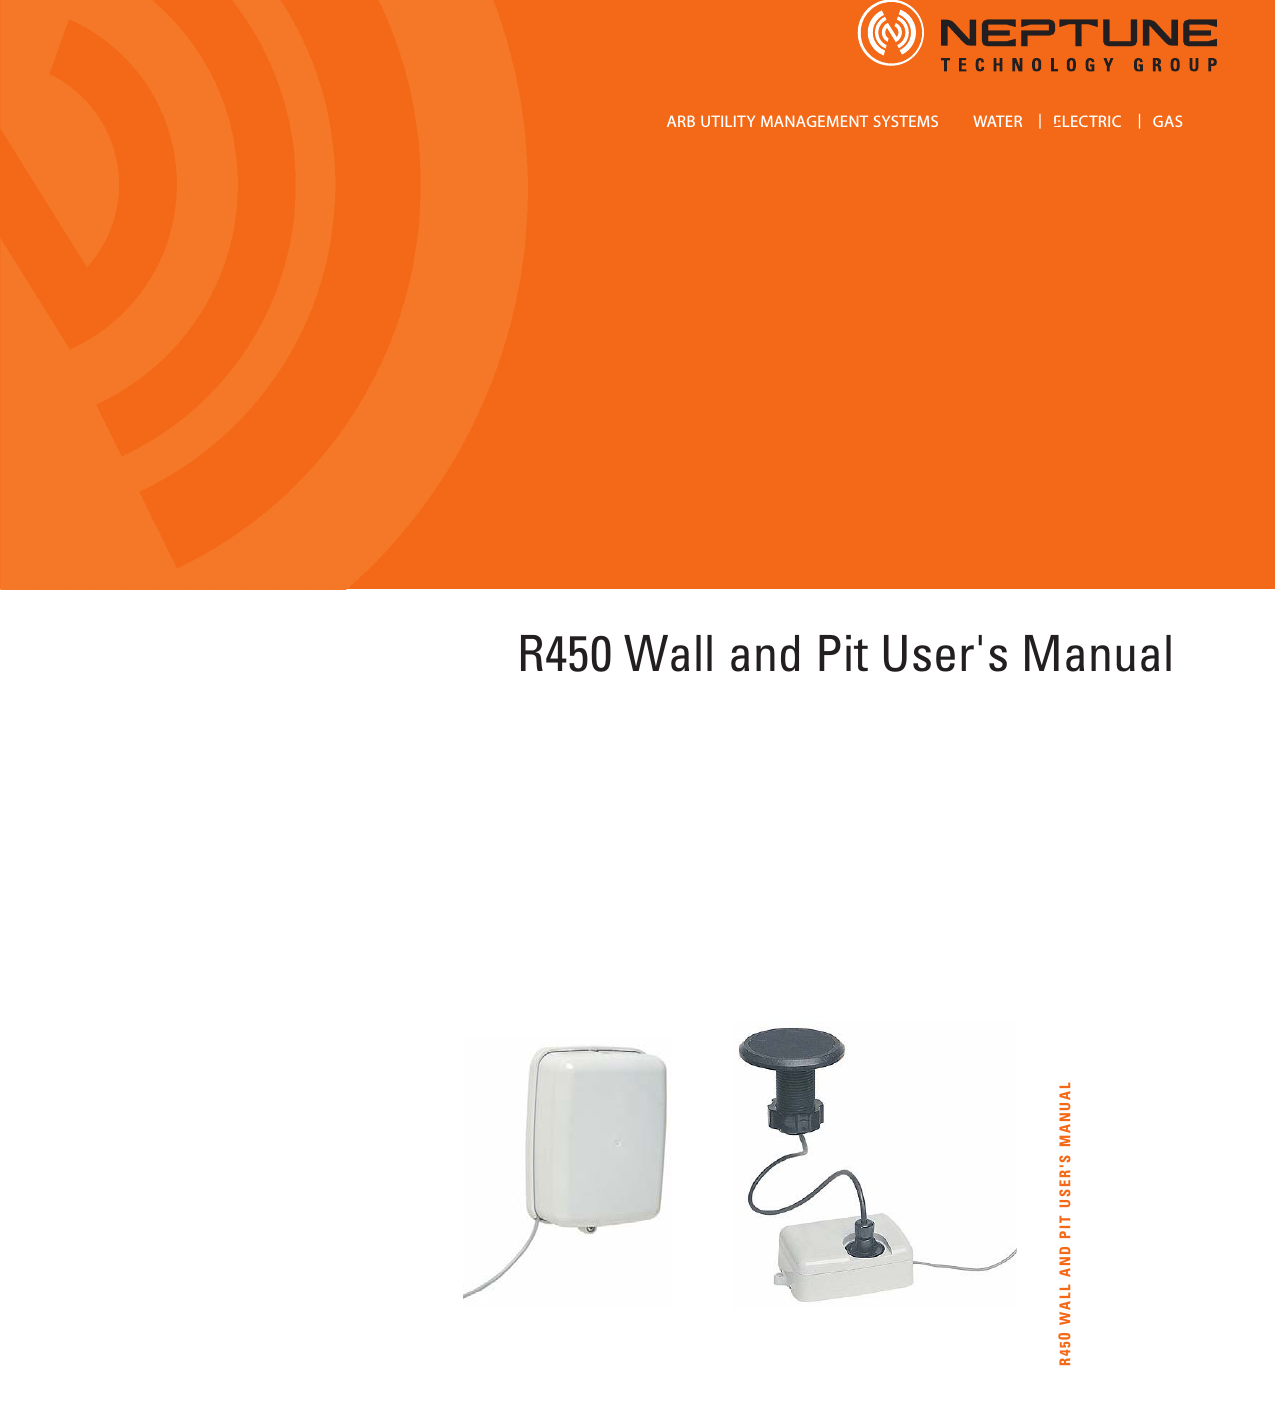                              ARB UTILITY MANAGEMENT SYSTEMS        WATER |ELECTRIC  |GASE-Cod   R450 WALL AND PIT USER&apos;S MANUAL                                R450 Wall and Pit User&apos;s Manual